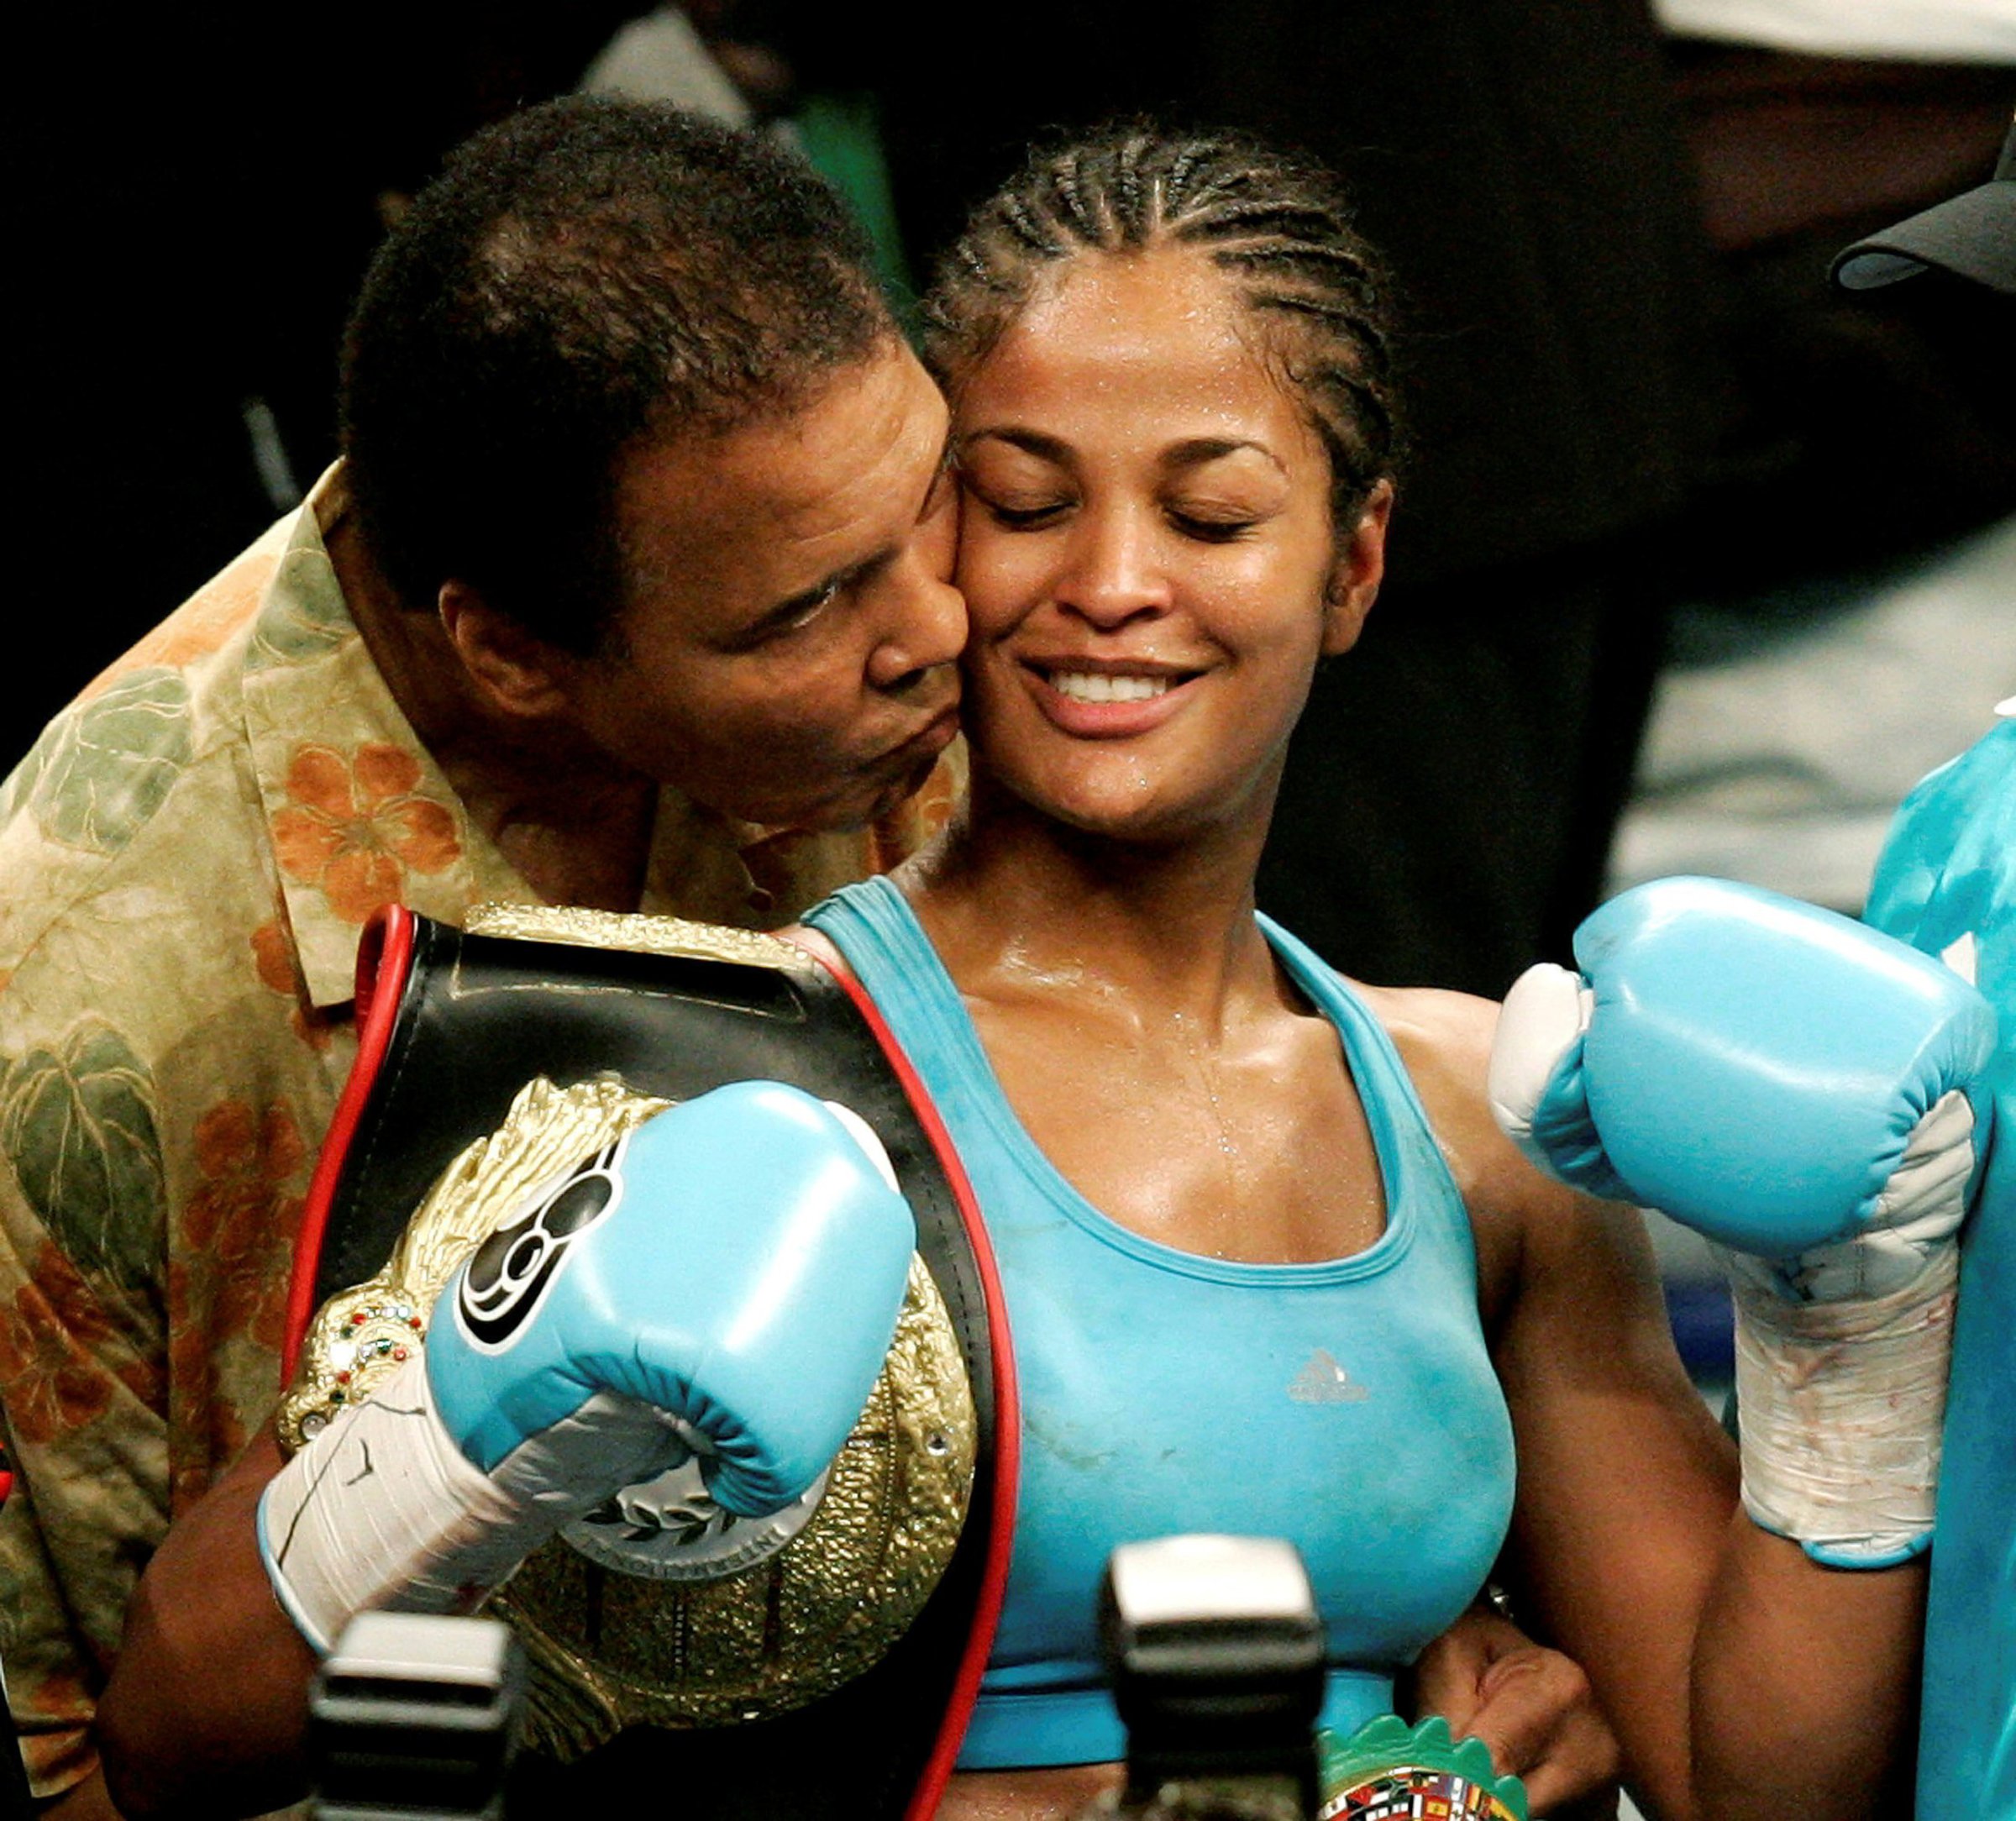 Laila Ali is kissed by her father, boxing great Muhammad Ali, at the MCI Center in Washington D.C., June 11, 2005.